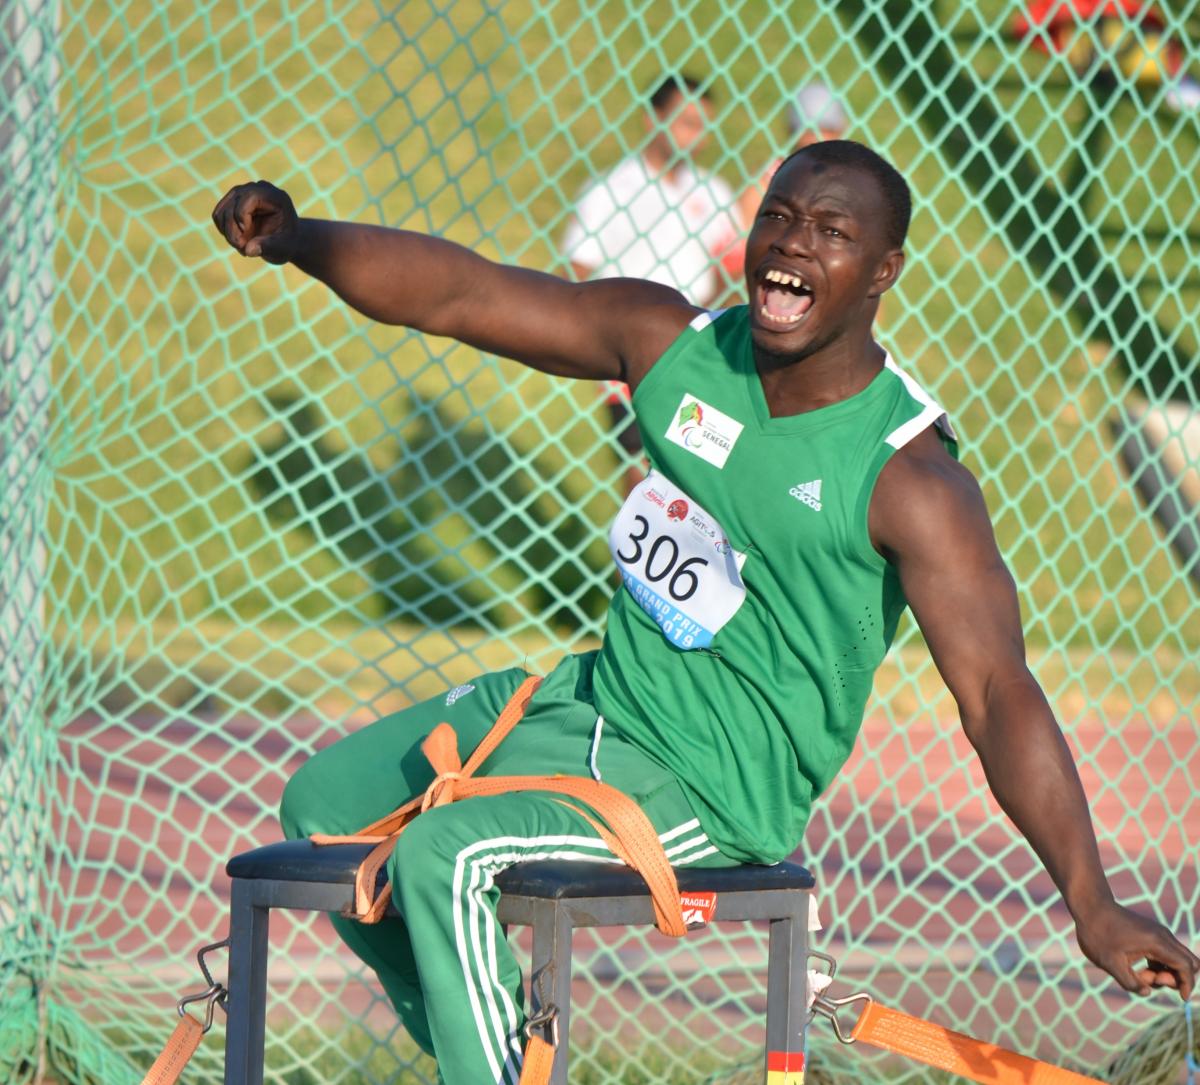 Black man yells after releasing discus